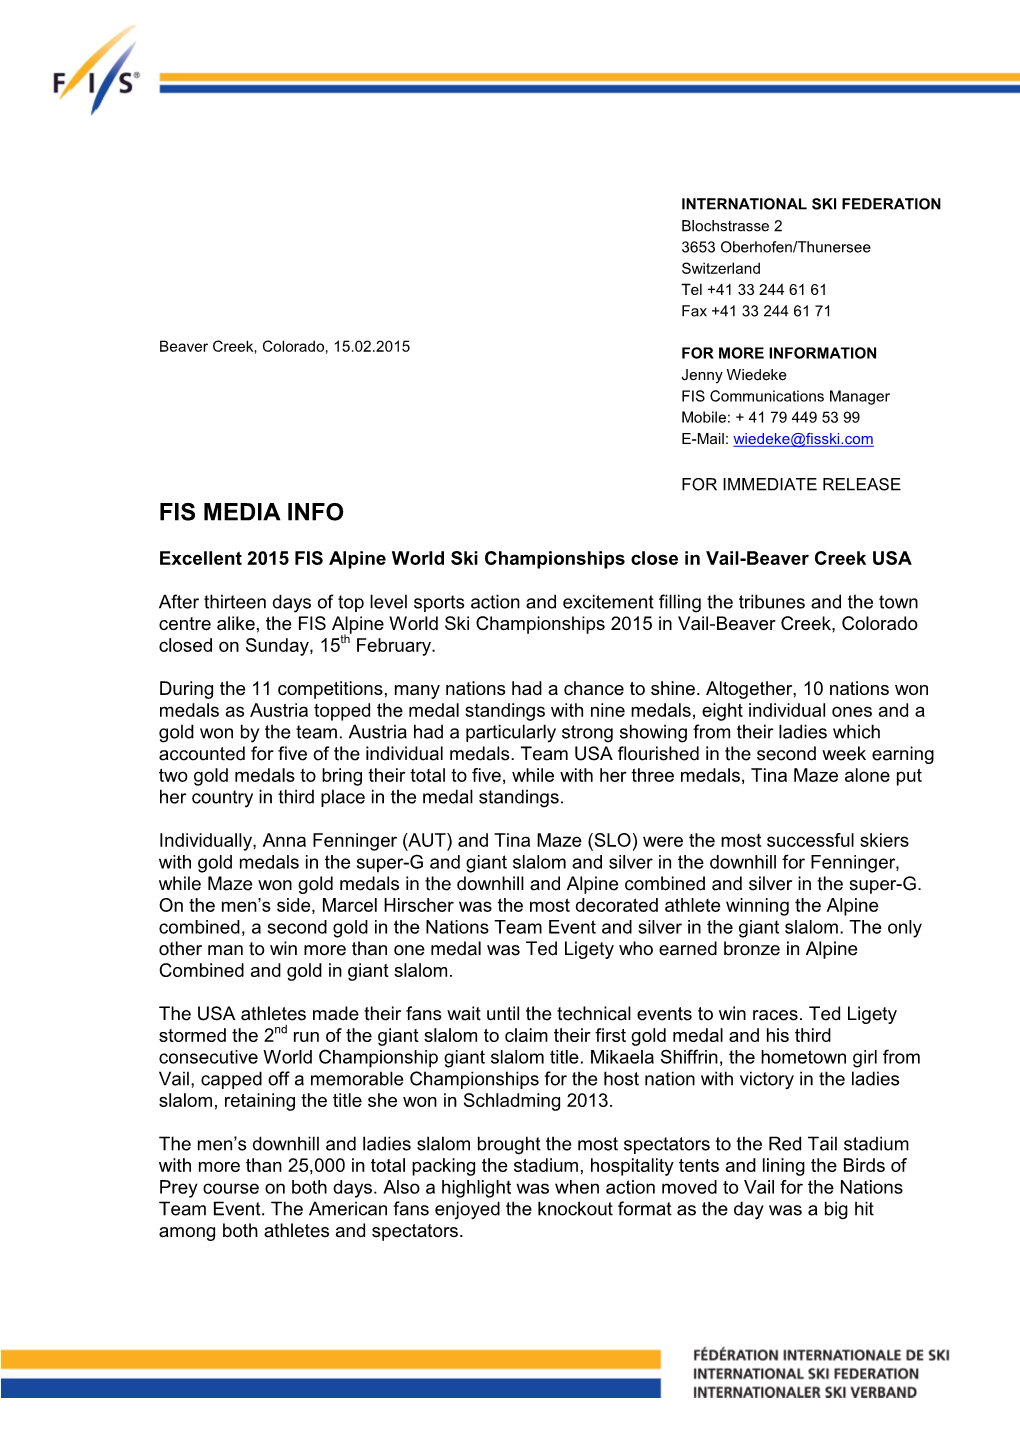 Vail 2015 Closing Press Release